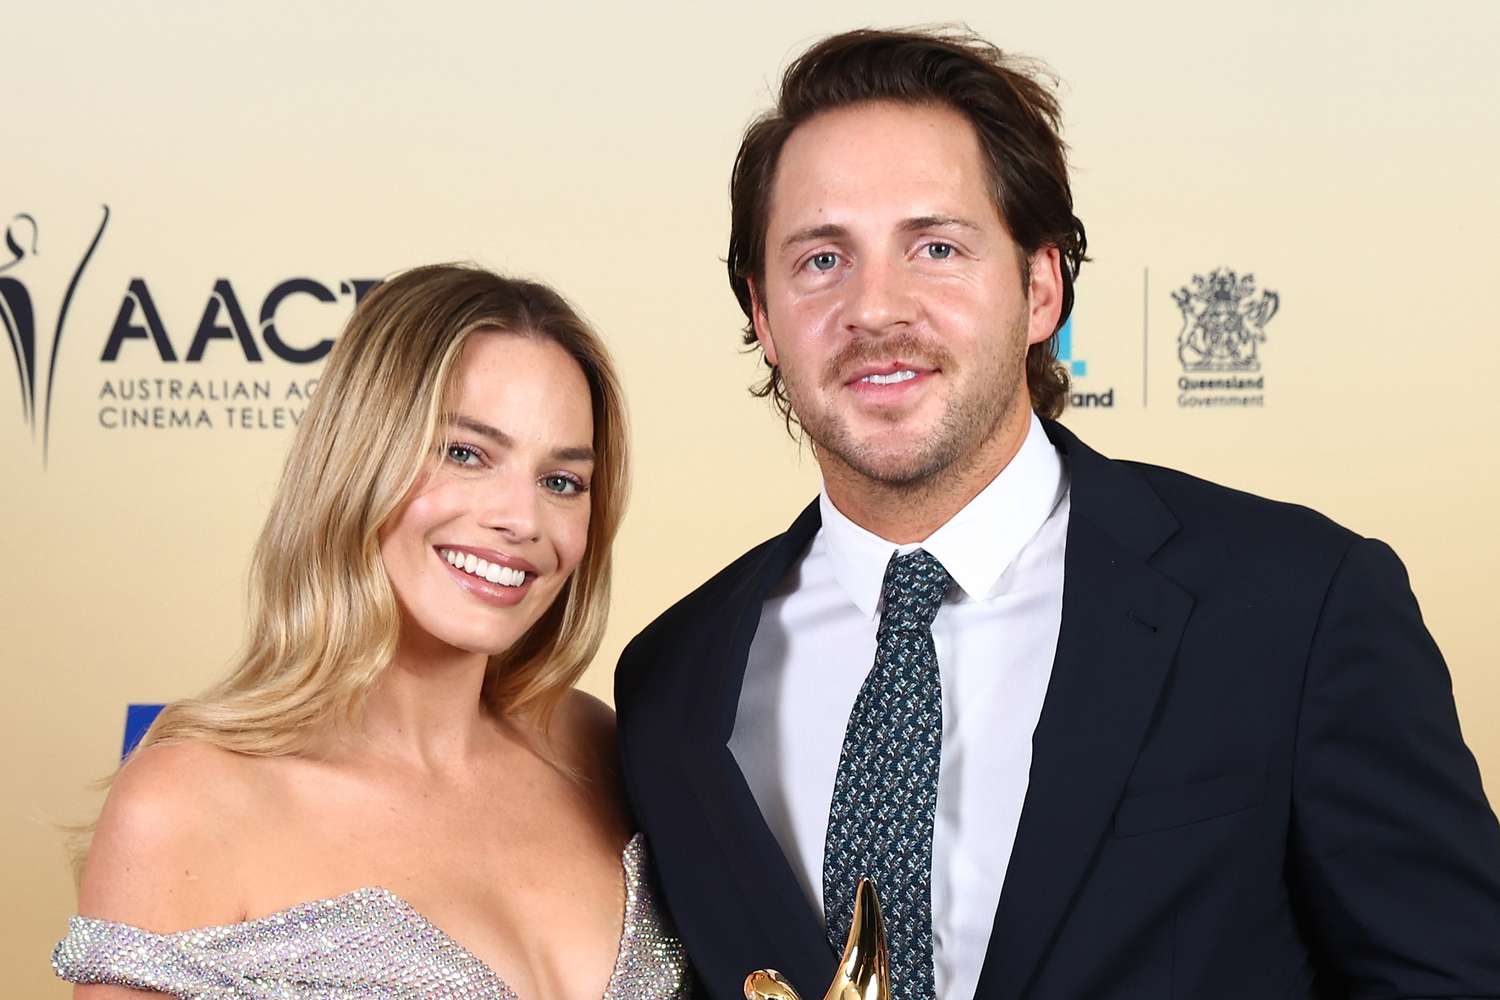 Pregnant Margot Robbie and Tom Ackerley Knew They 'Really Wanted' to Be Parents Early In Their Relationship: Source (Exclusive)